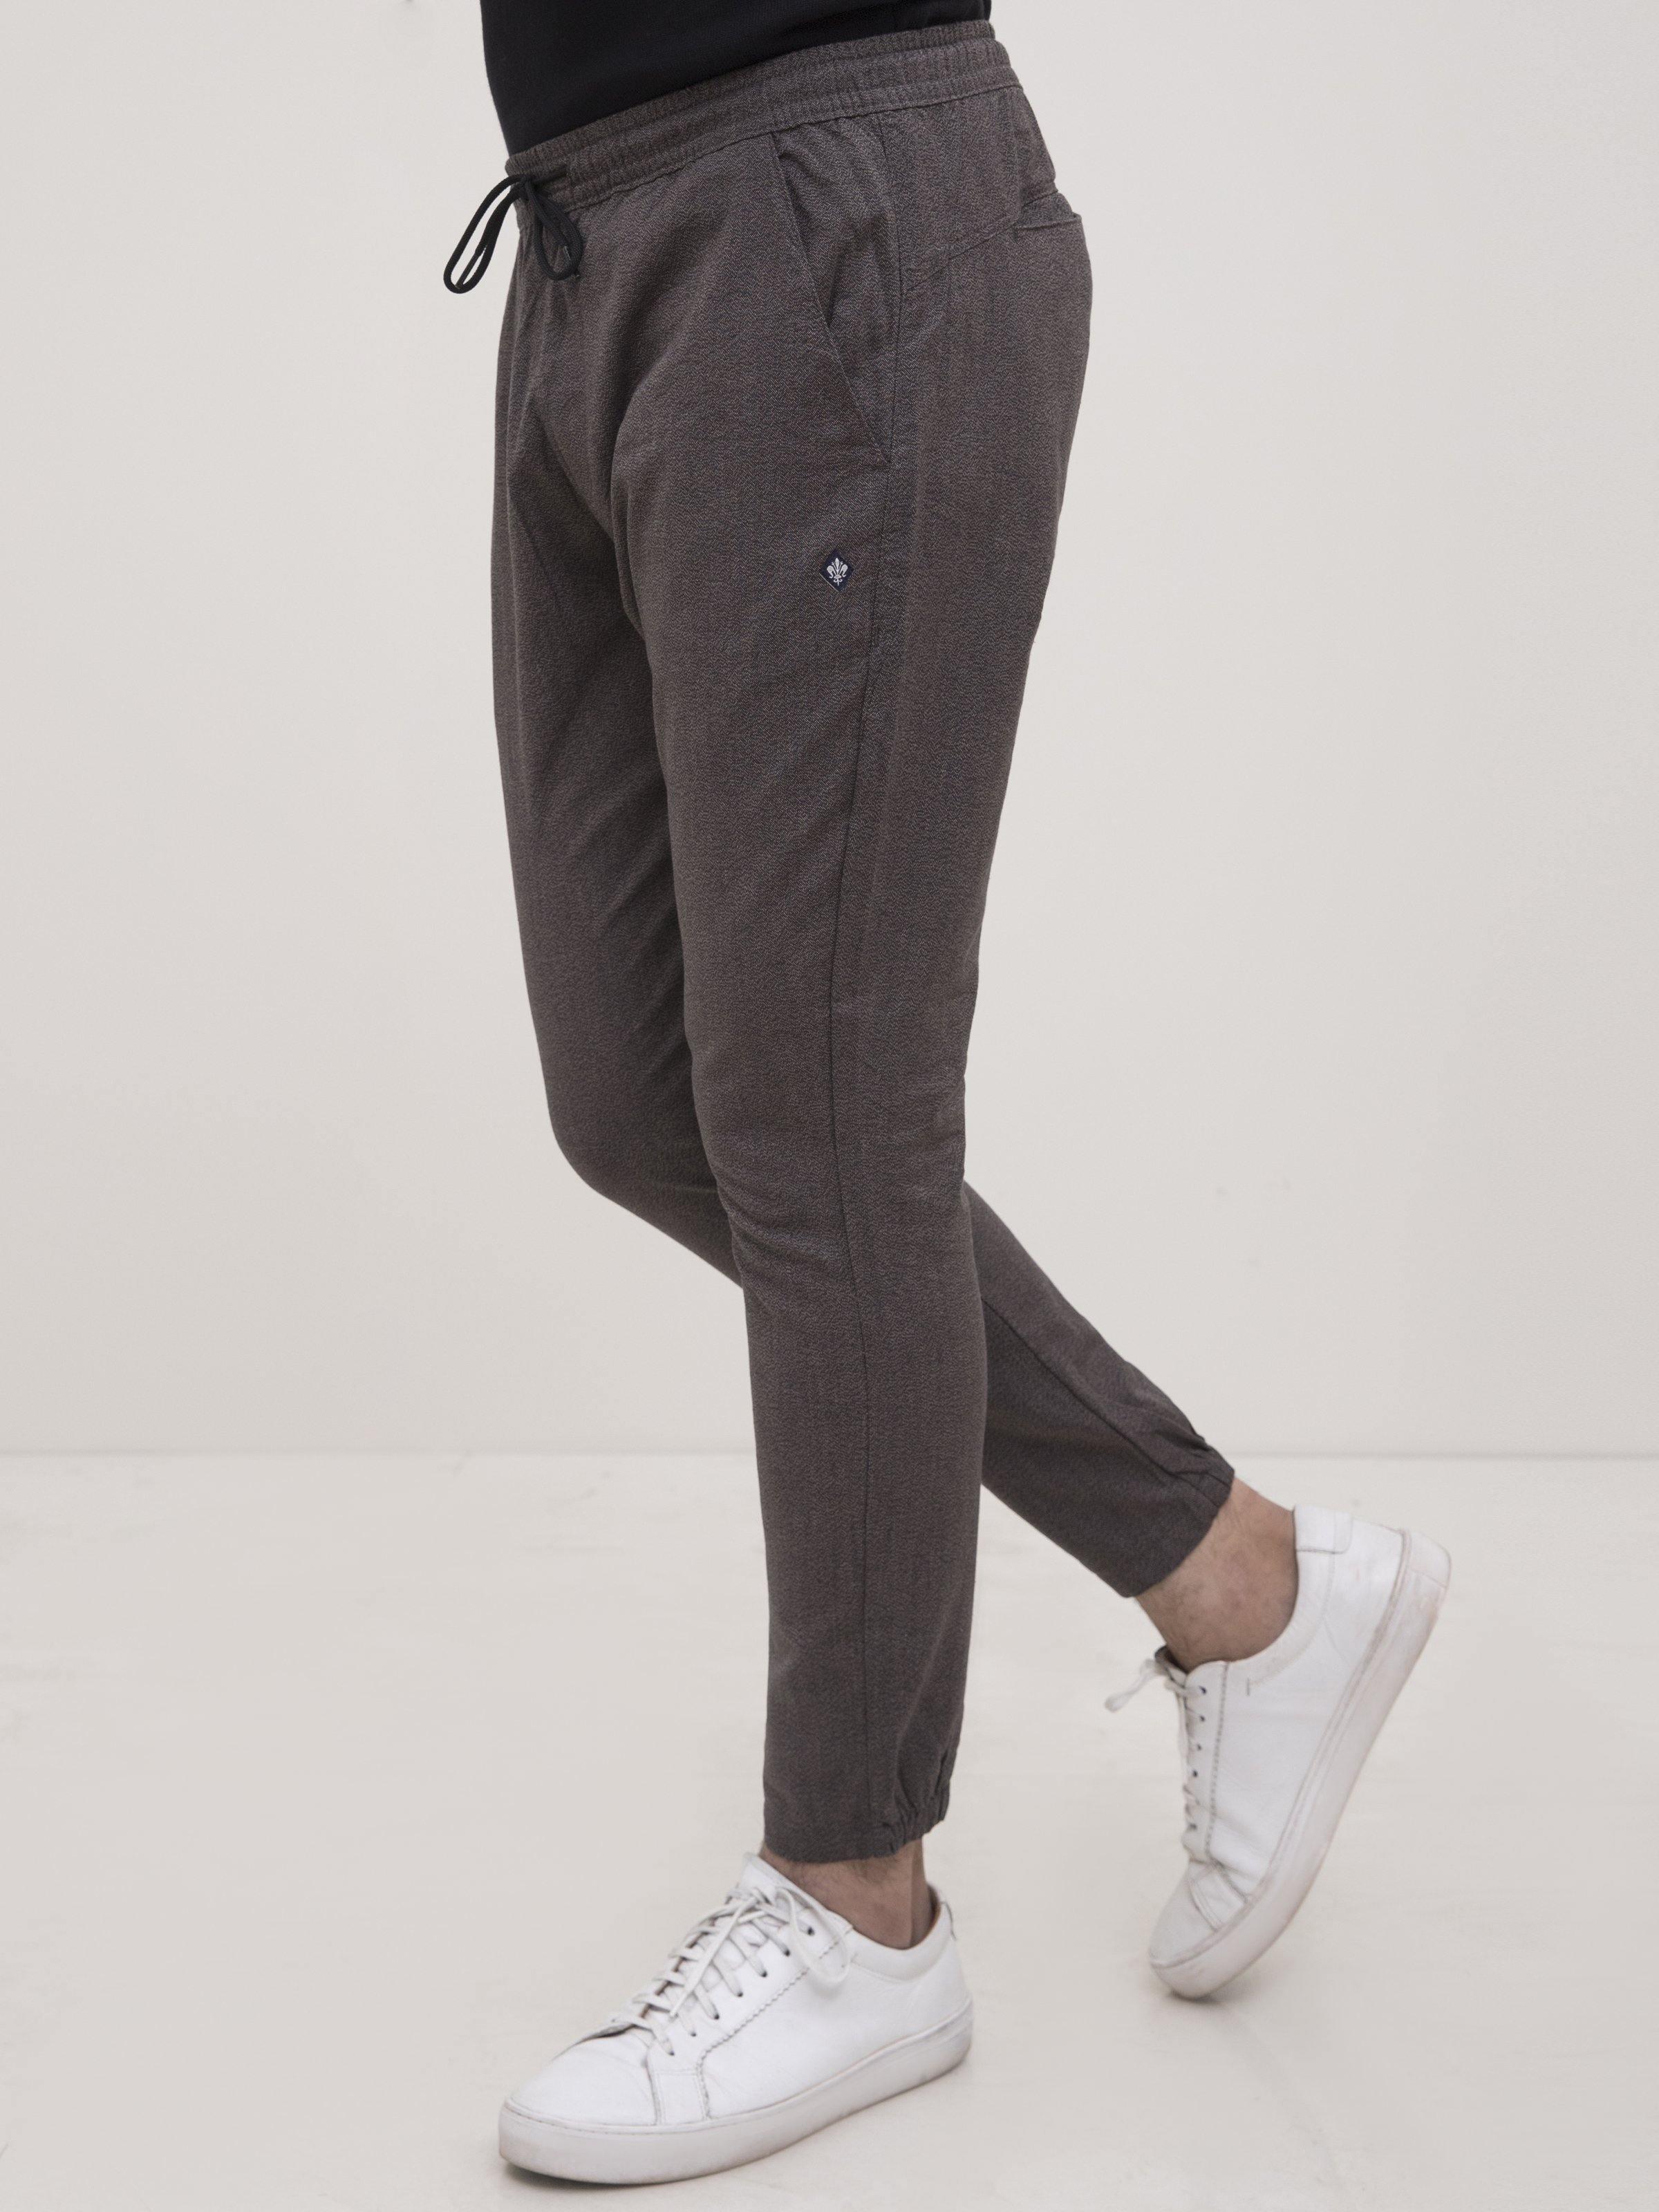 SELF TEXTURED TAPERED FIT TROUSER BLACK KHAKI at Charcoal Clothing